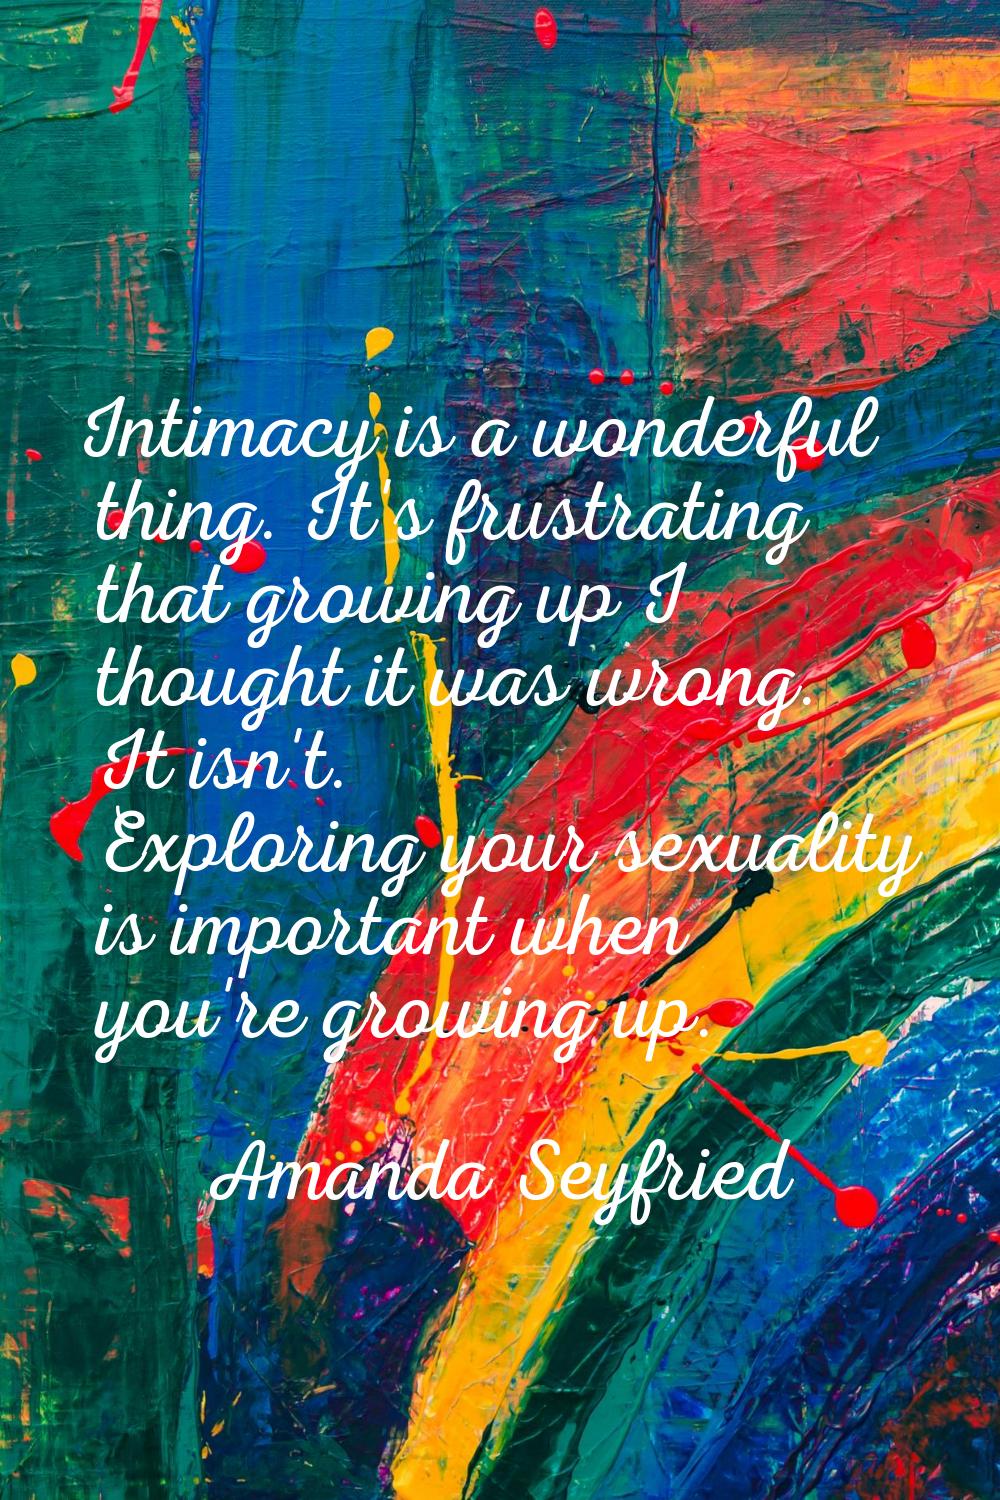 Intimacy is a wonderful thing. It's frustrating that growing up I thought it was wrong. It isn't. E